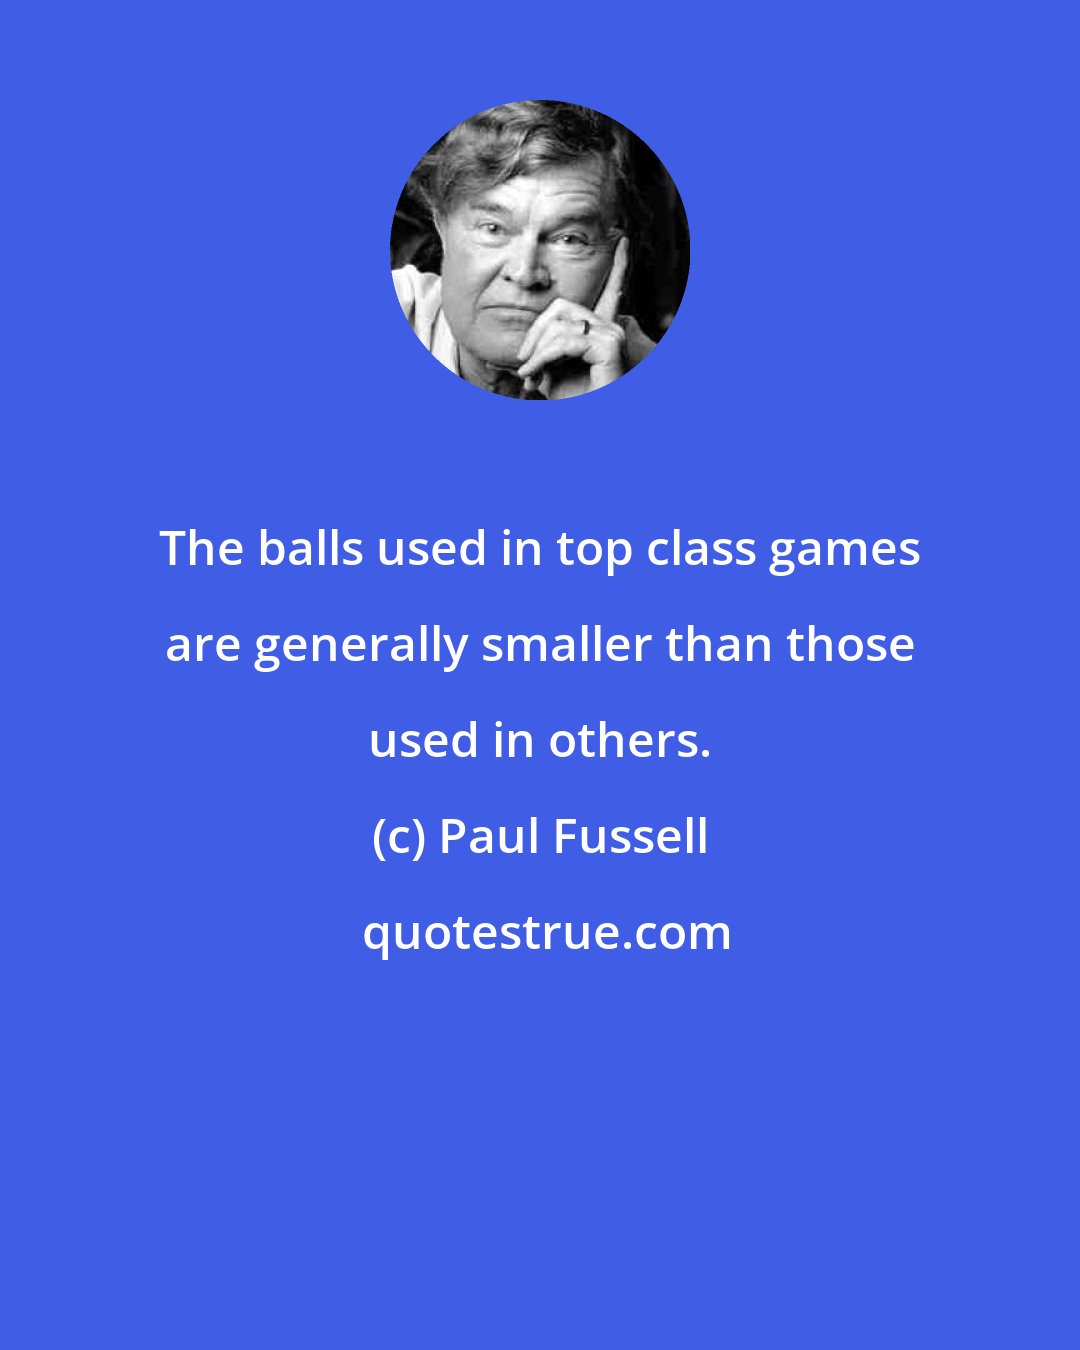 Paul Fussell: The balls used in top class games are generally smaller than those used in others.